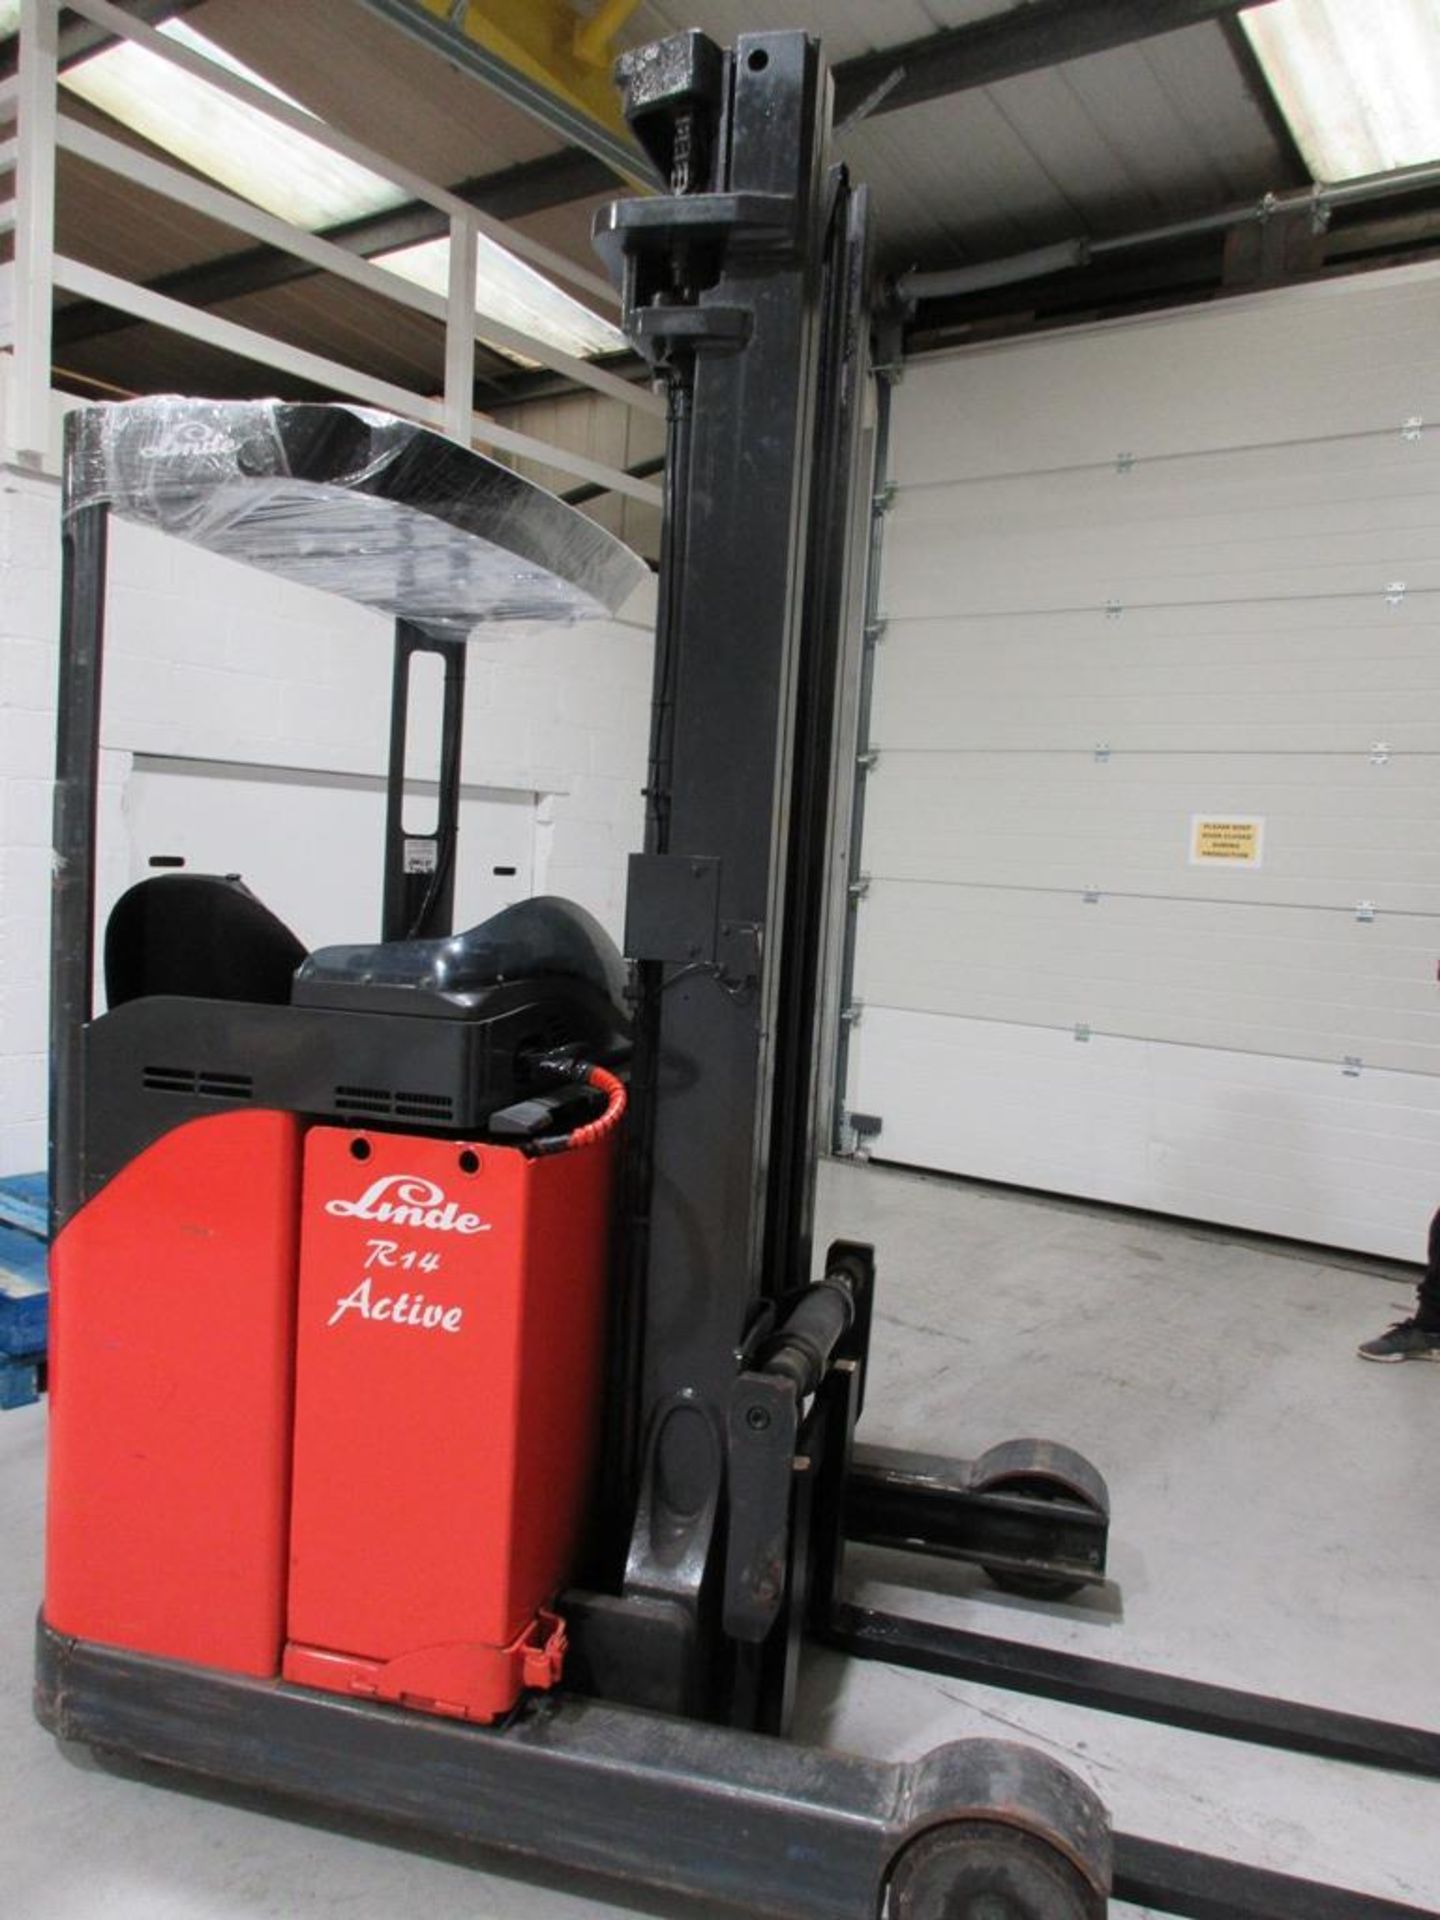 Linde R14 Active ride on, battery operated t/m reach forklift truck, capacity 1400kgs, run hours: - Image 3 of 11